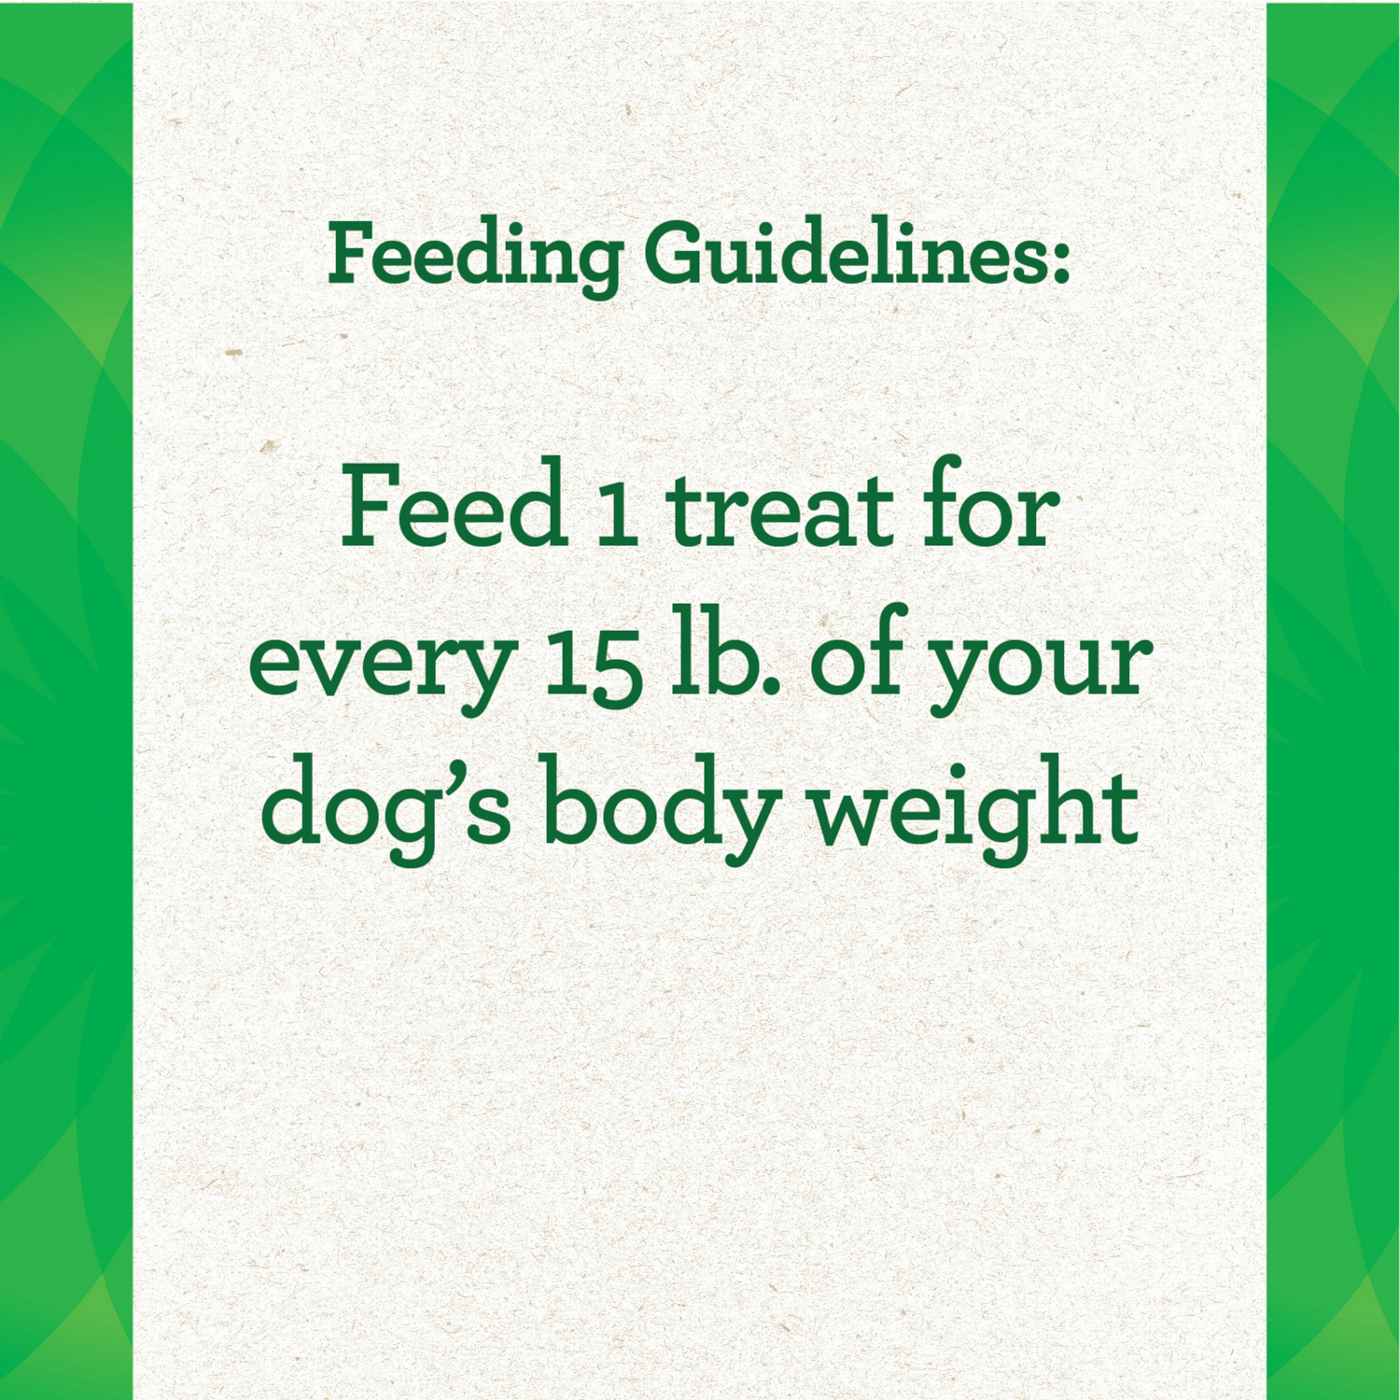 GREENIES PILL POCKETS for Dogs Capsule Size - Chicken Flavor; image 5 of 5